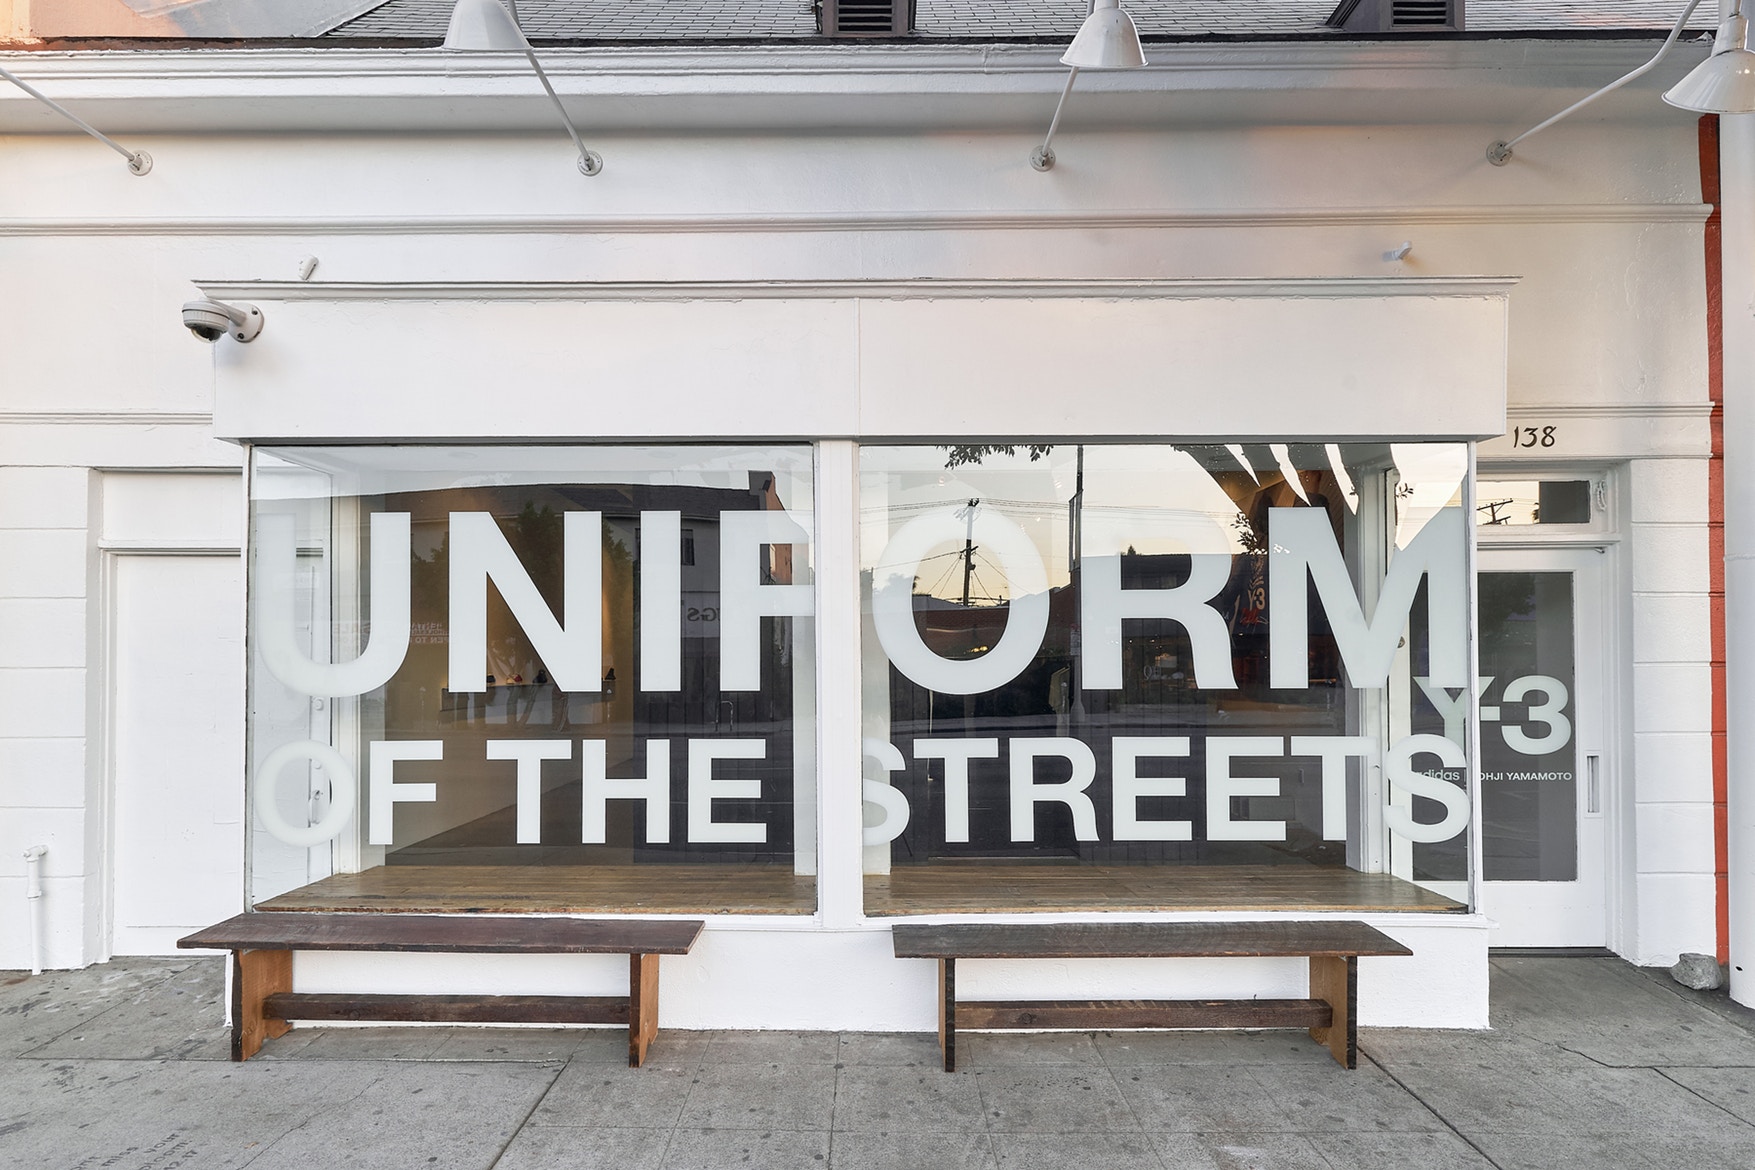 New Y-3 Store Opened in Los Angeles